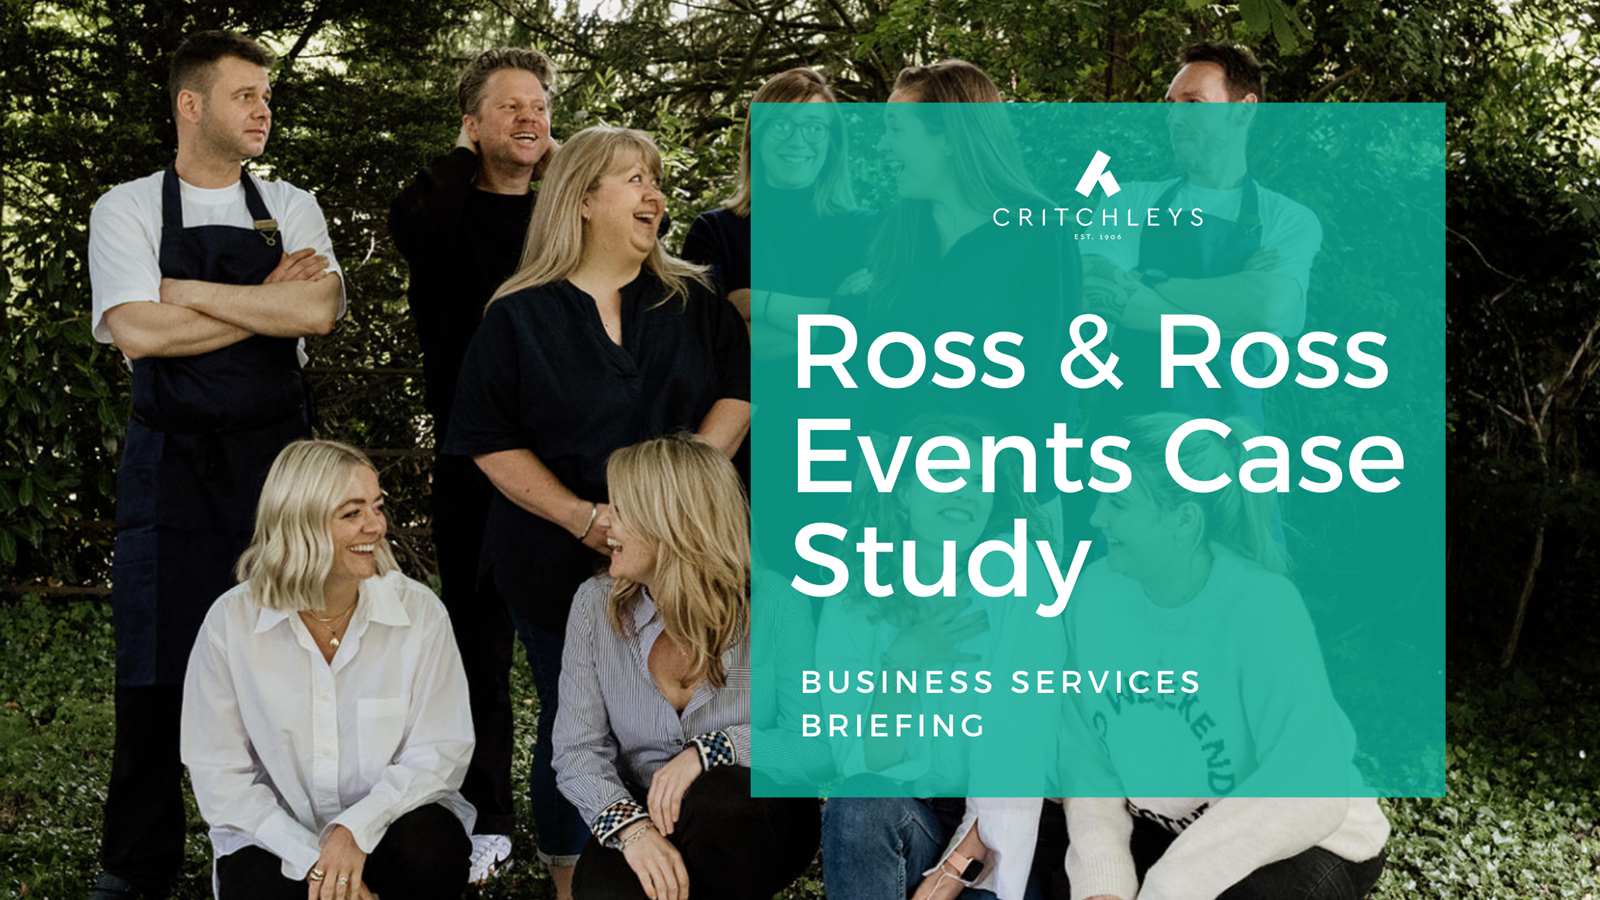 Ross & Ross Events Case Study